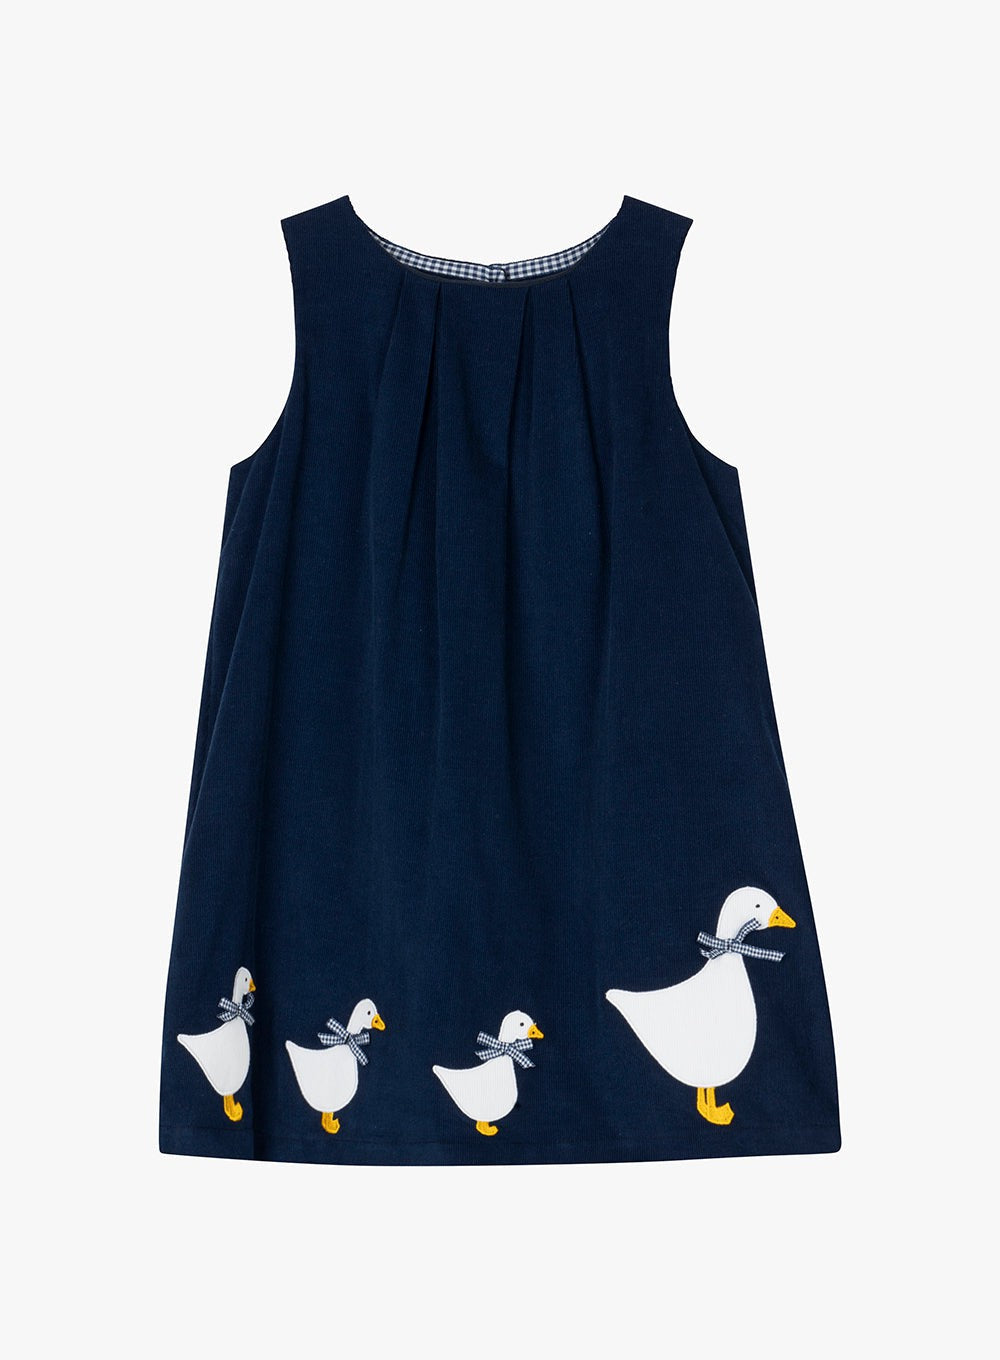 Confiture Dress Jemima Cord Pinafore in Navy